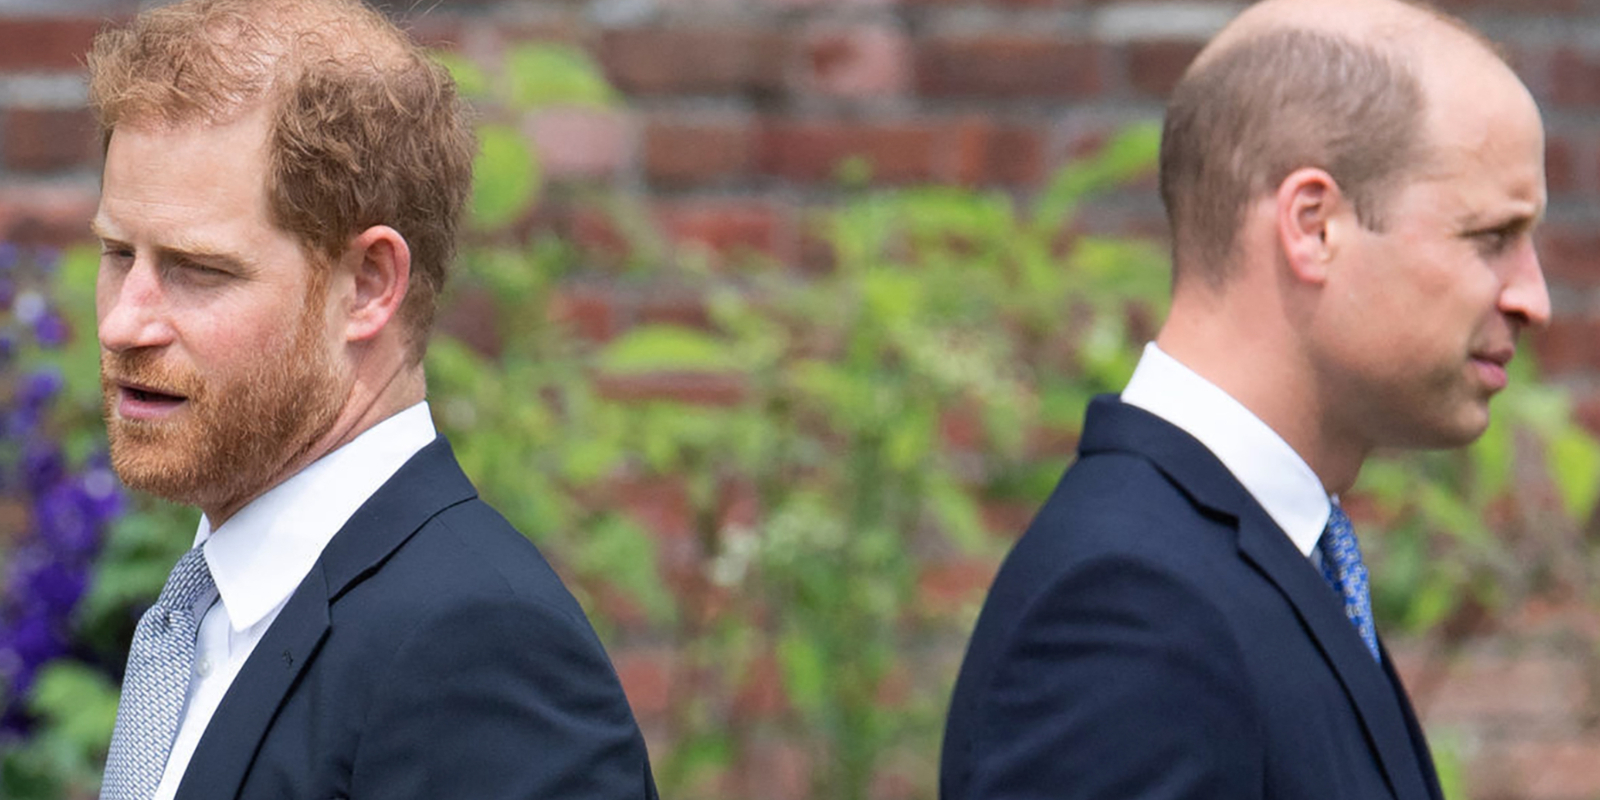 Prince Harry and Prince William stand with their backs toward each other.